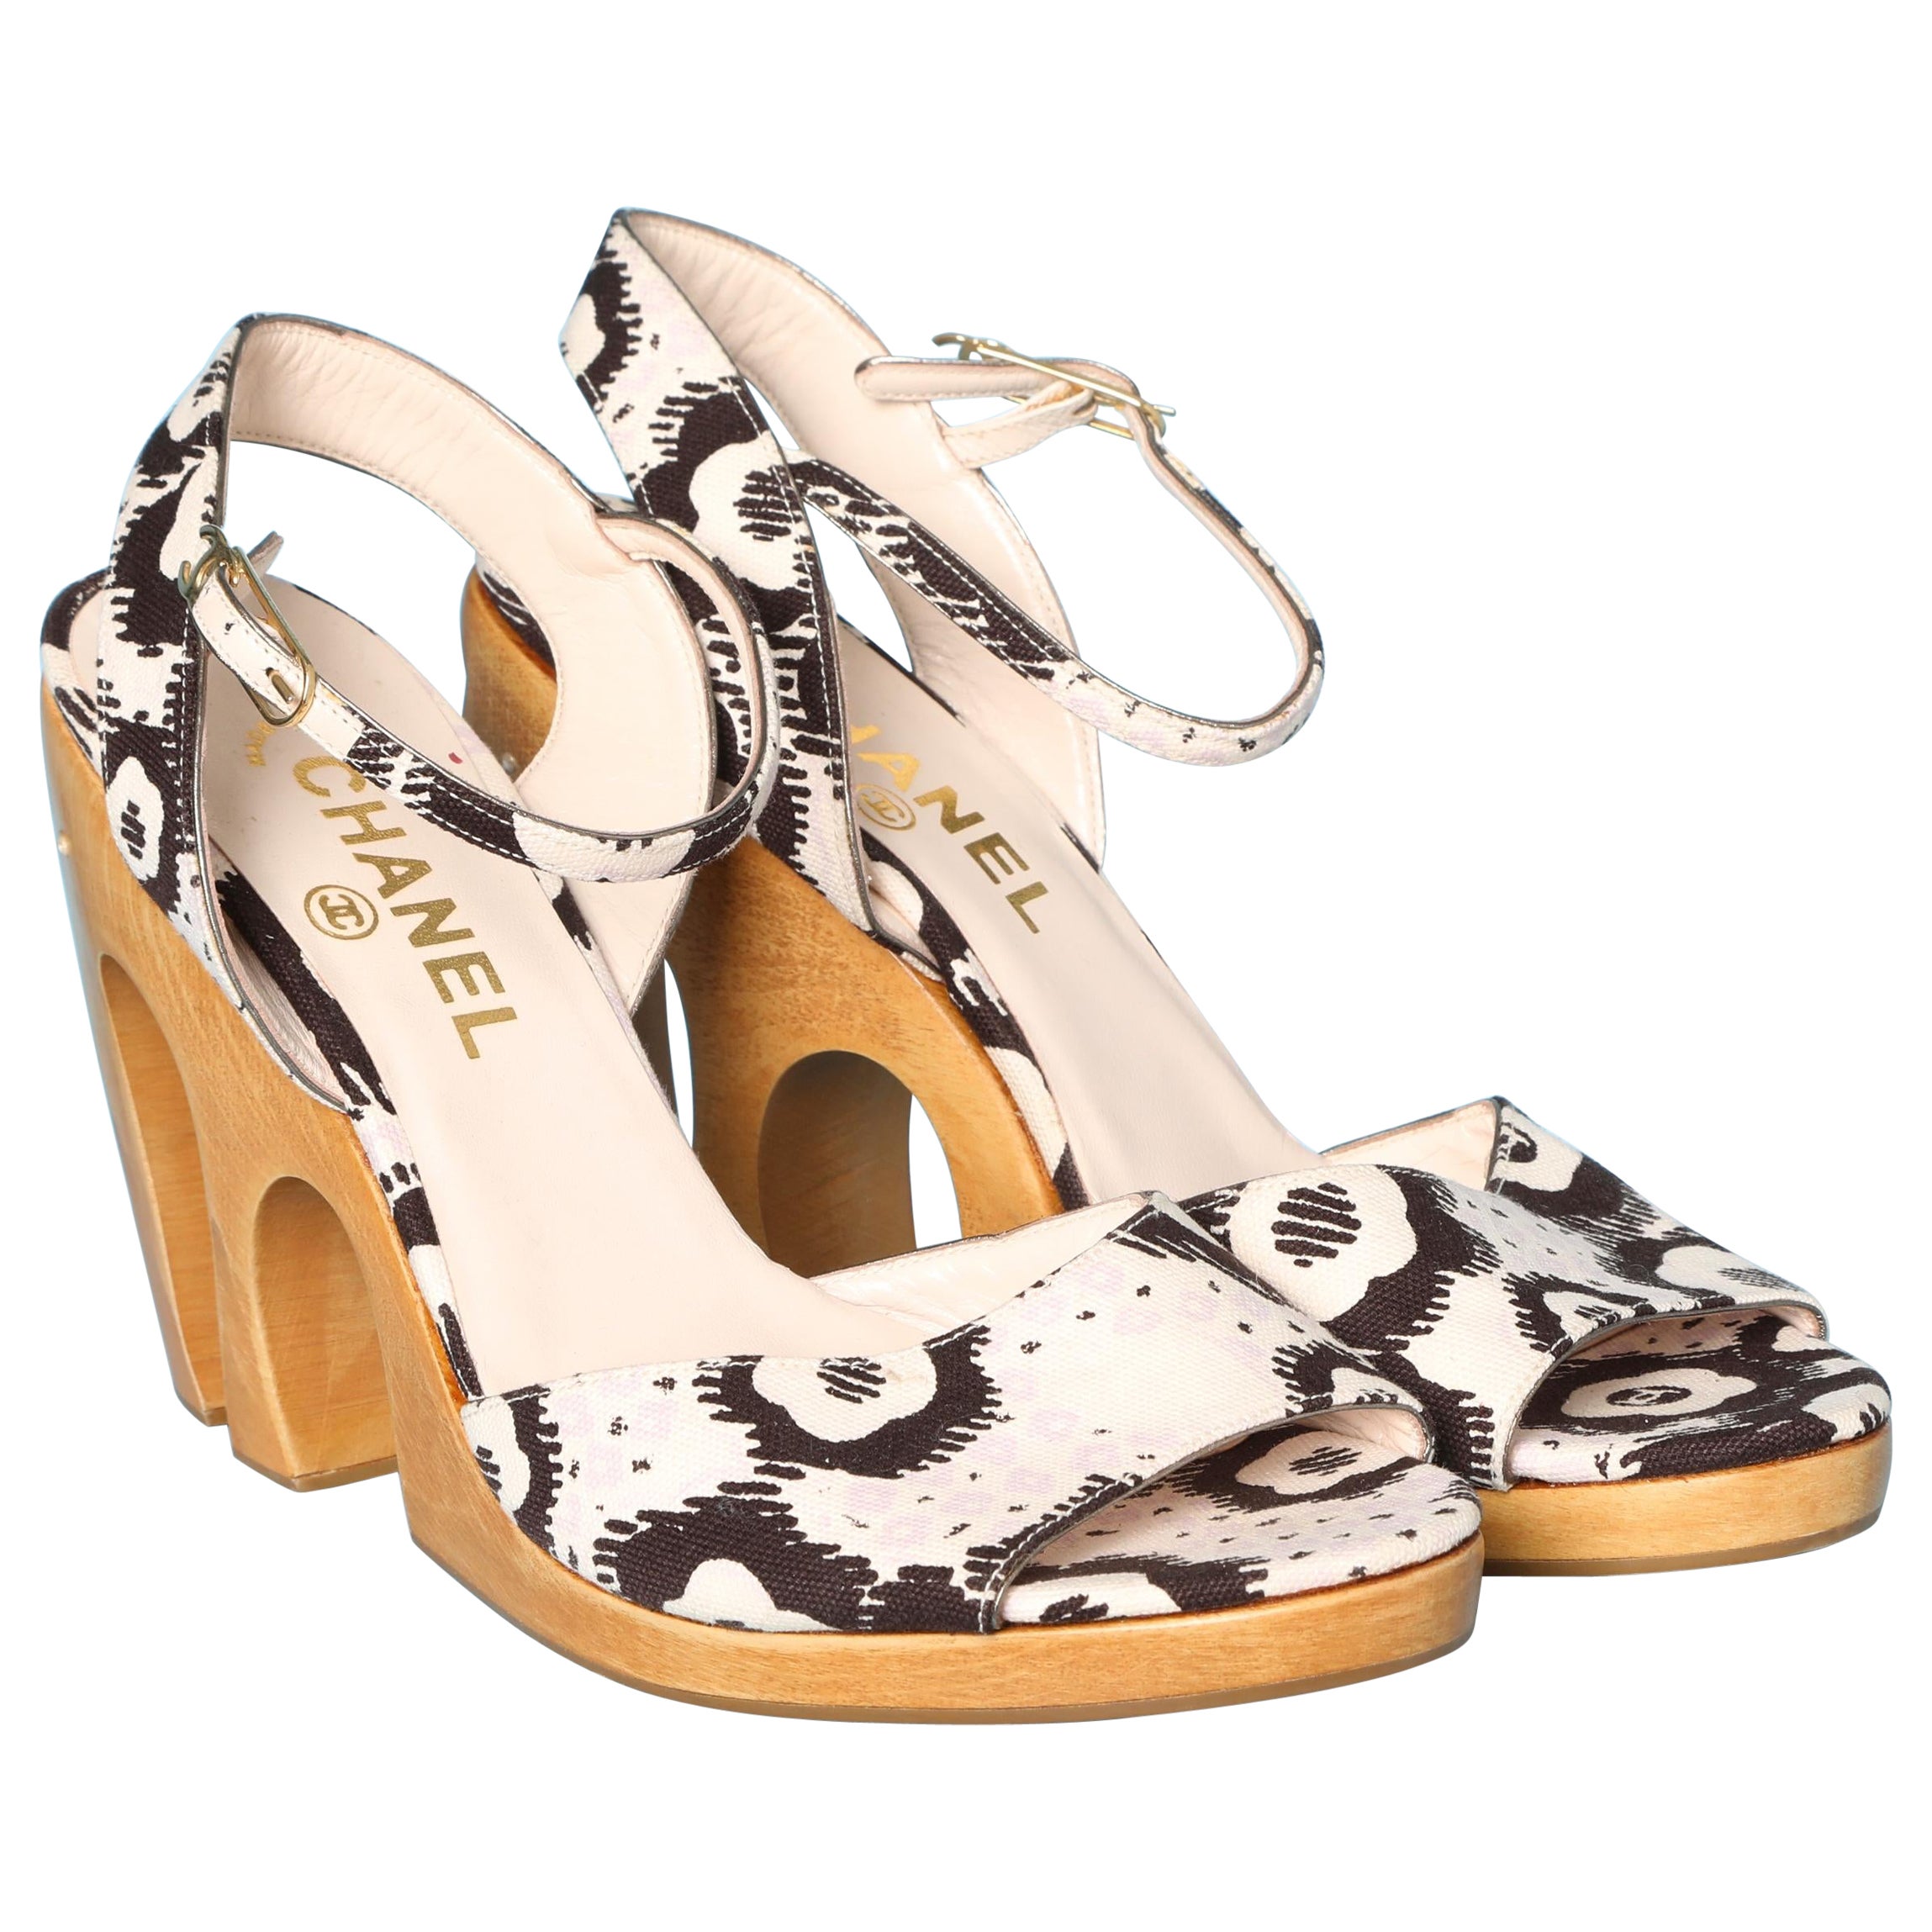 Chanel sandal with printed fabric and carved wood heels 